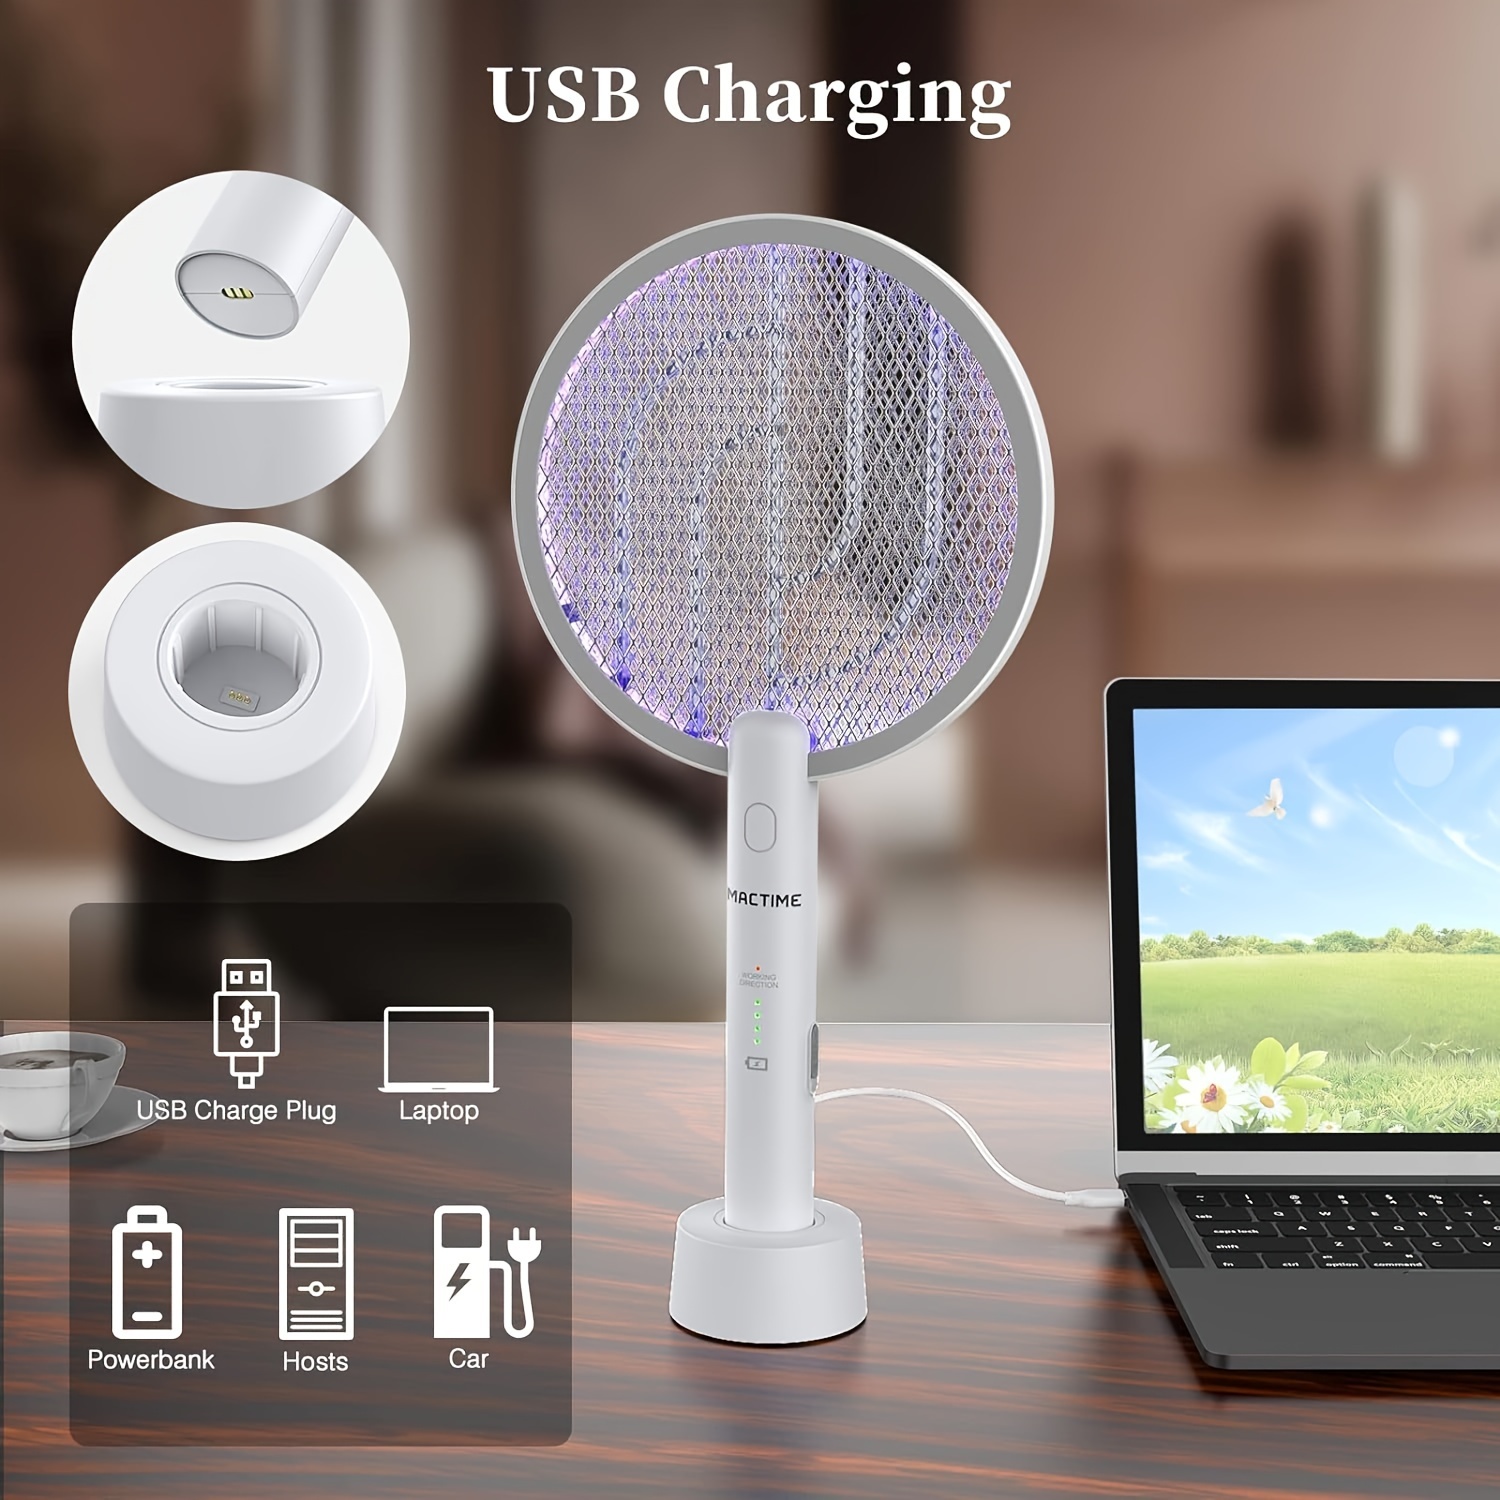 

Mosquito Swatter, Rechargeable Mosquito Swatter, Usb Charging With Base, With 1200mah Built-in Battery, Suitable For Kitchen, Living Room, Bedroom, Courtyard, Backyard, Garden